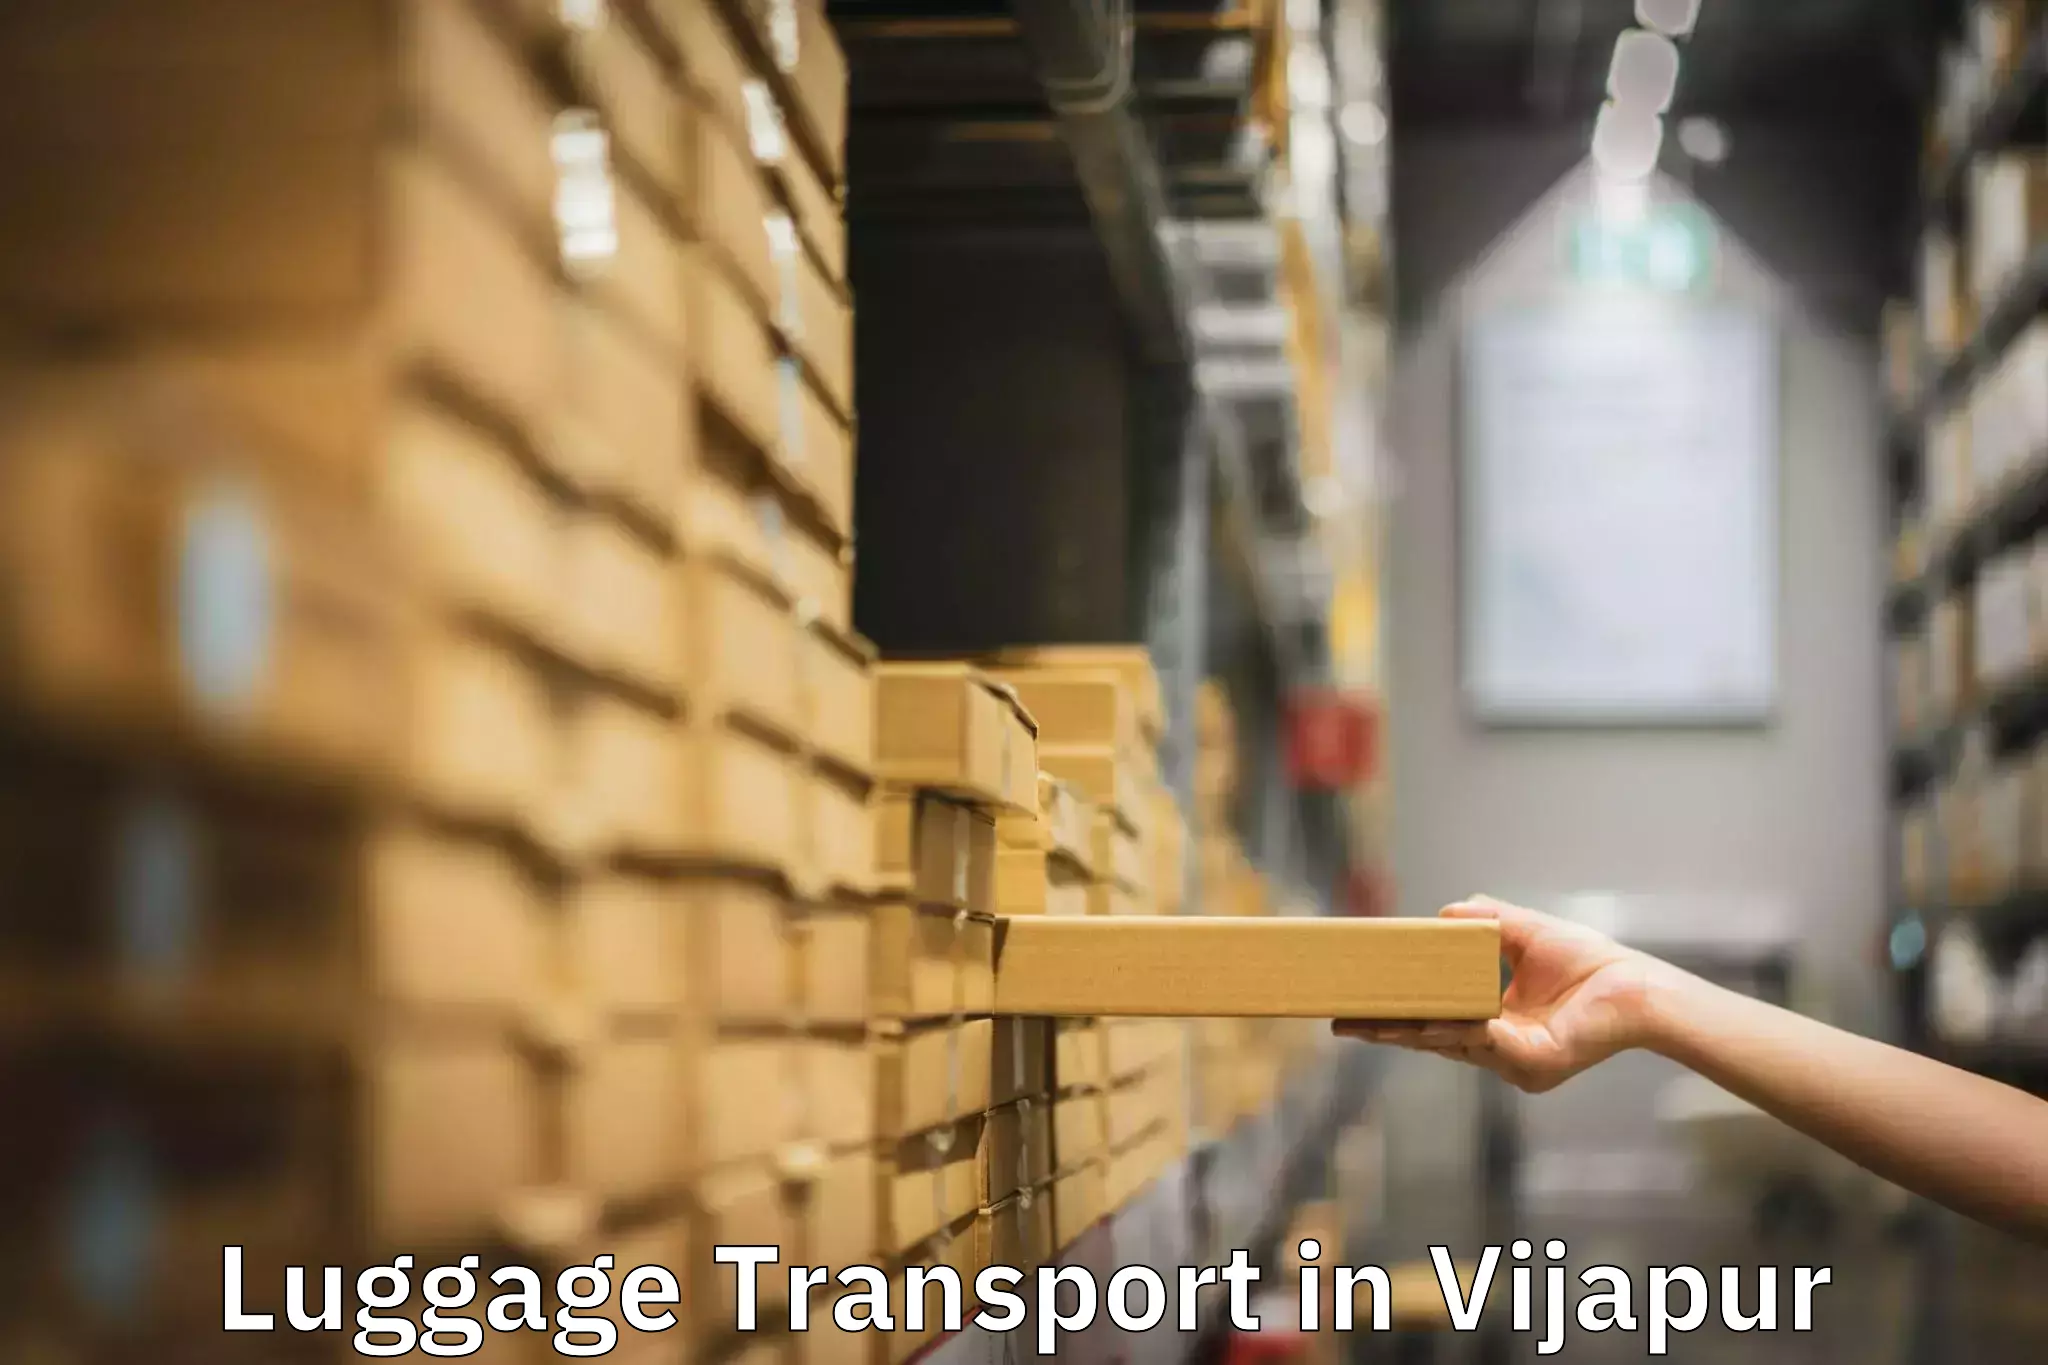 Automated luggage transport in Vijapur